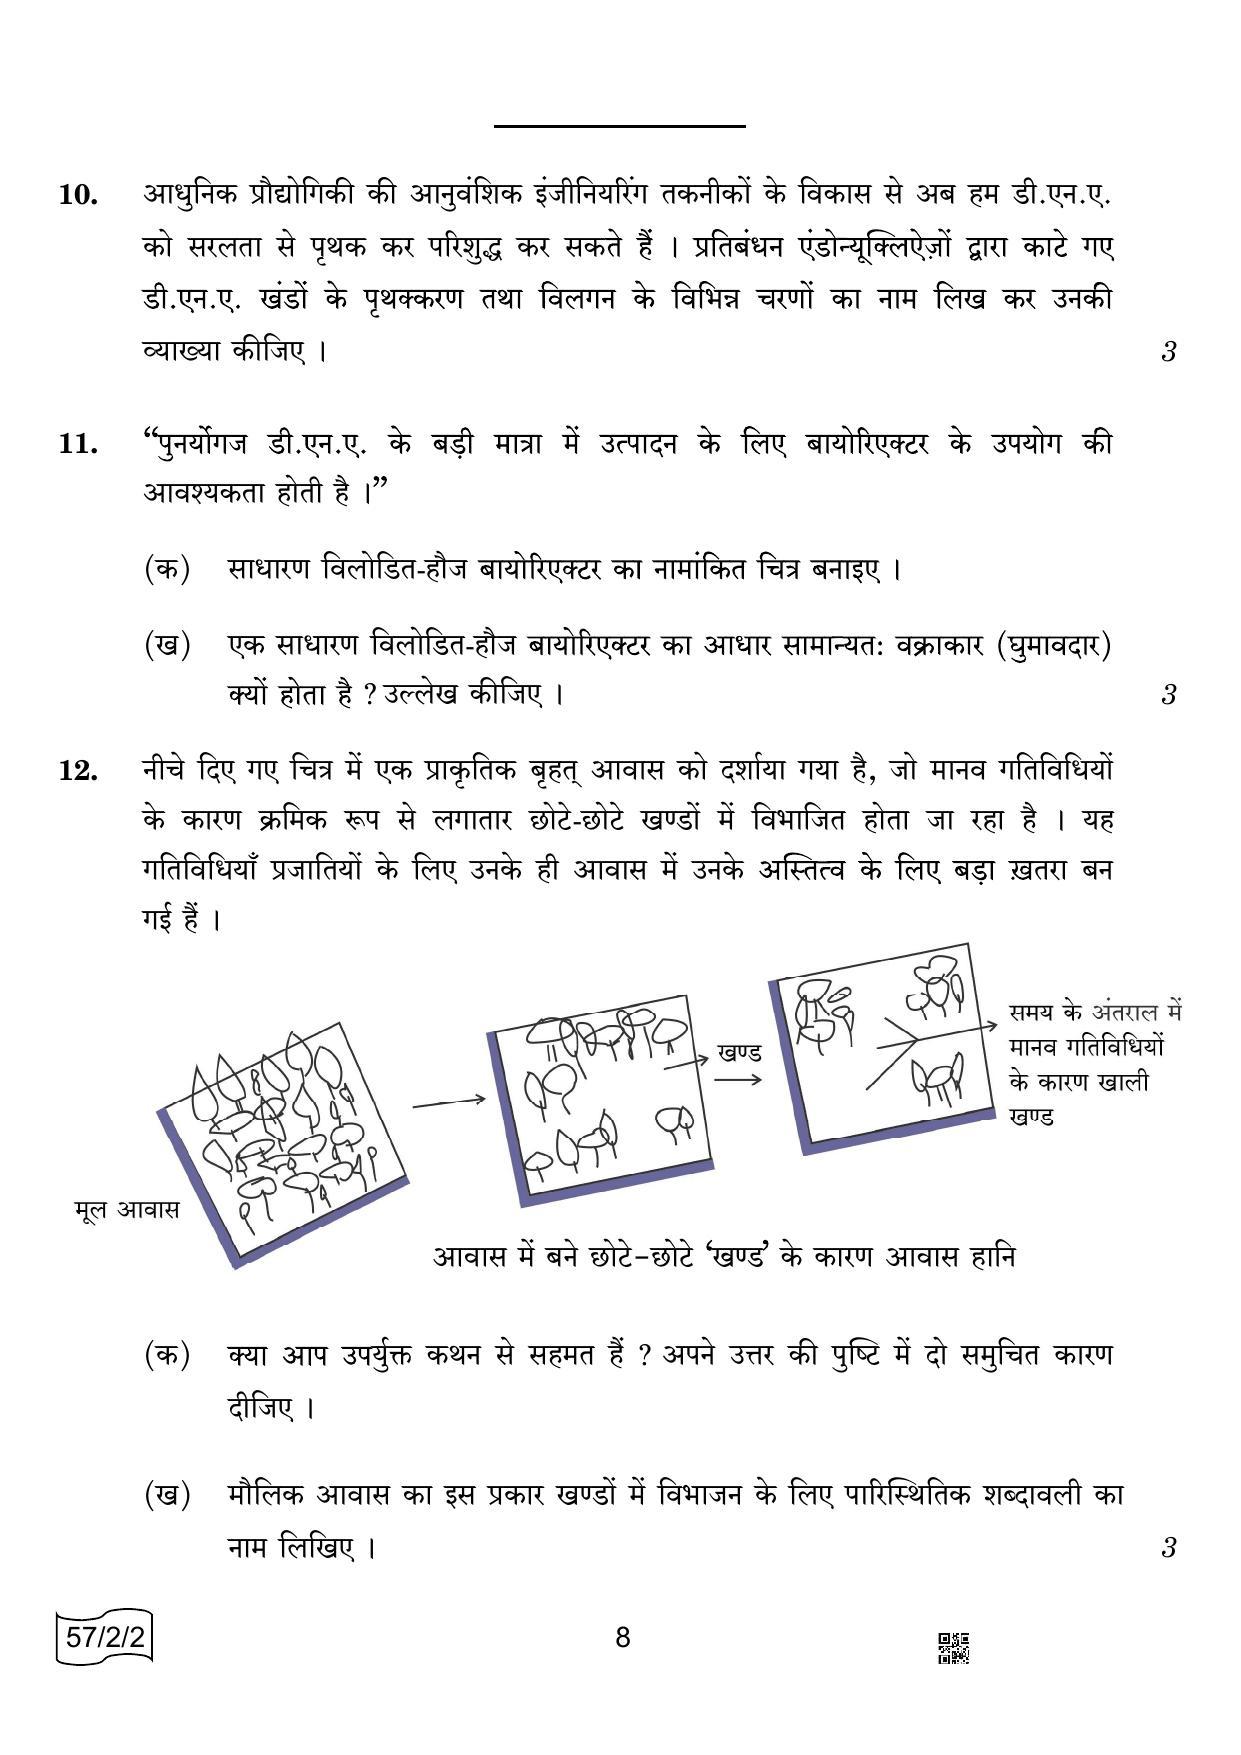 CBSE Class 12 57-2-2 Biology 2022 Question Paper - Page 8